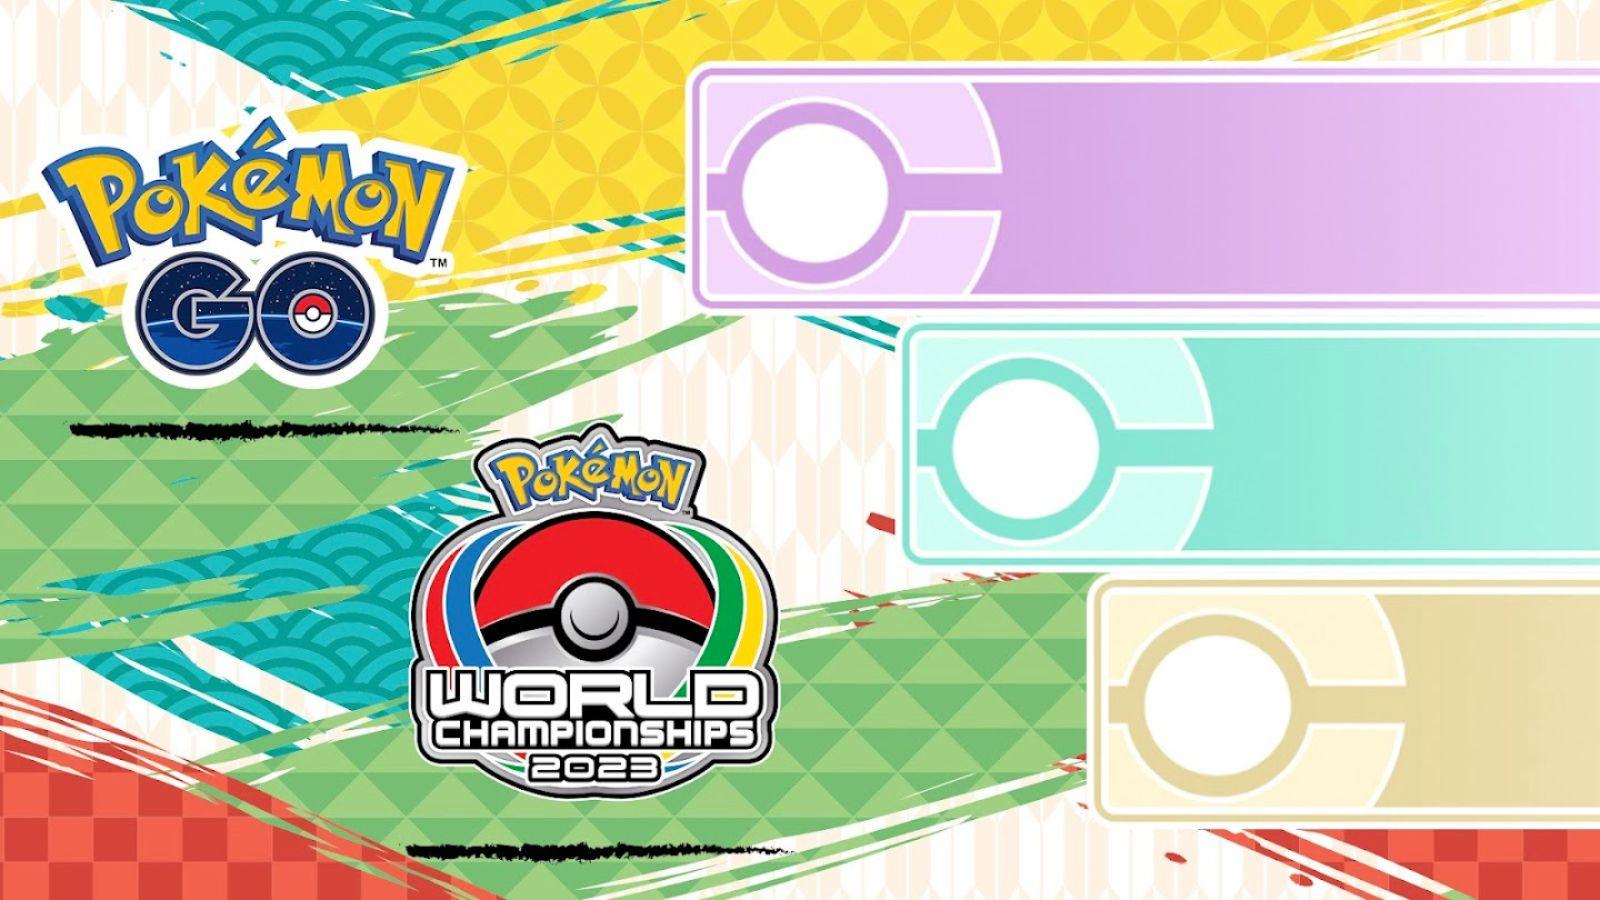 How to get Pokemon Go World Championships 2023 Timed Research Twitch